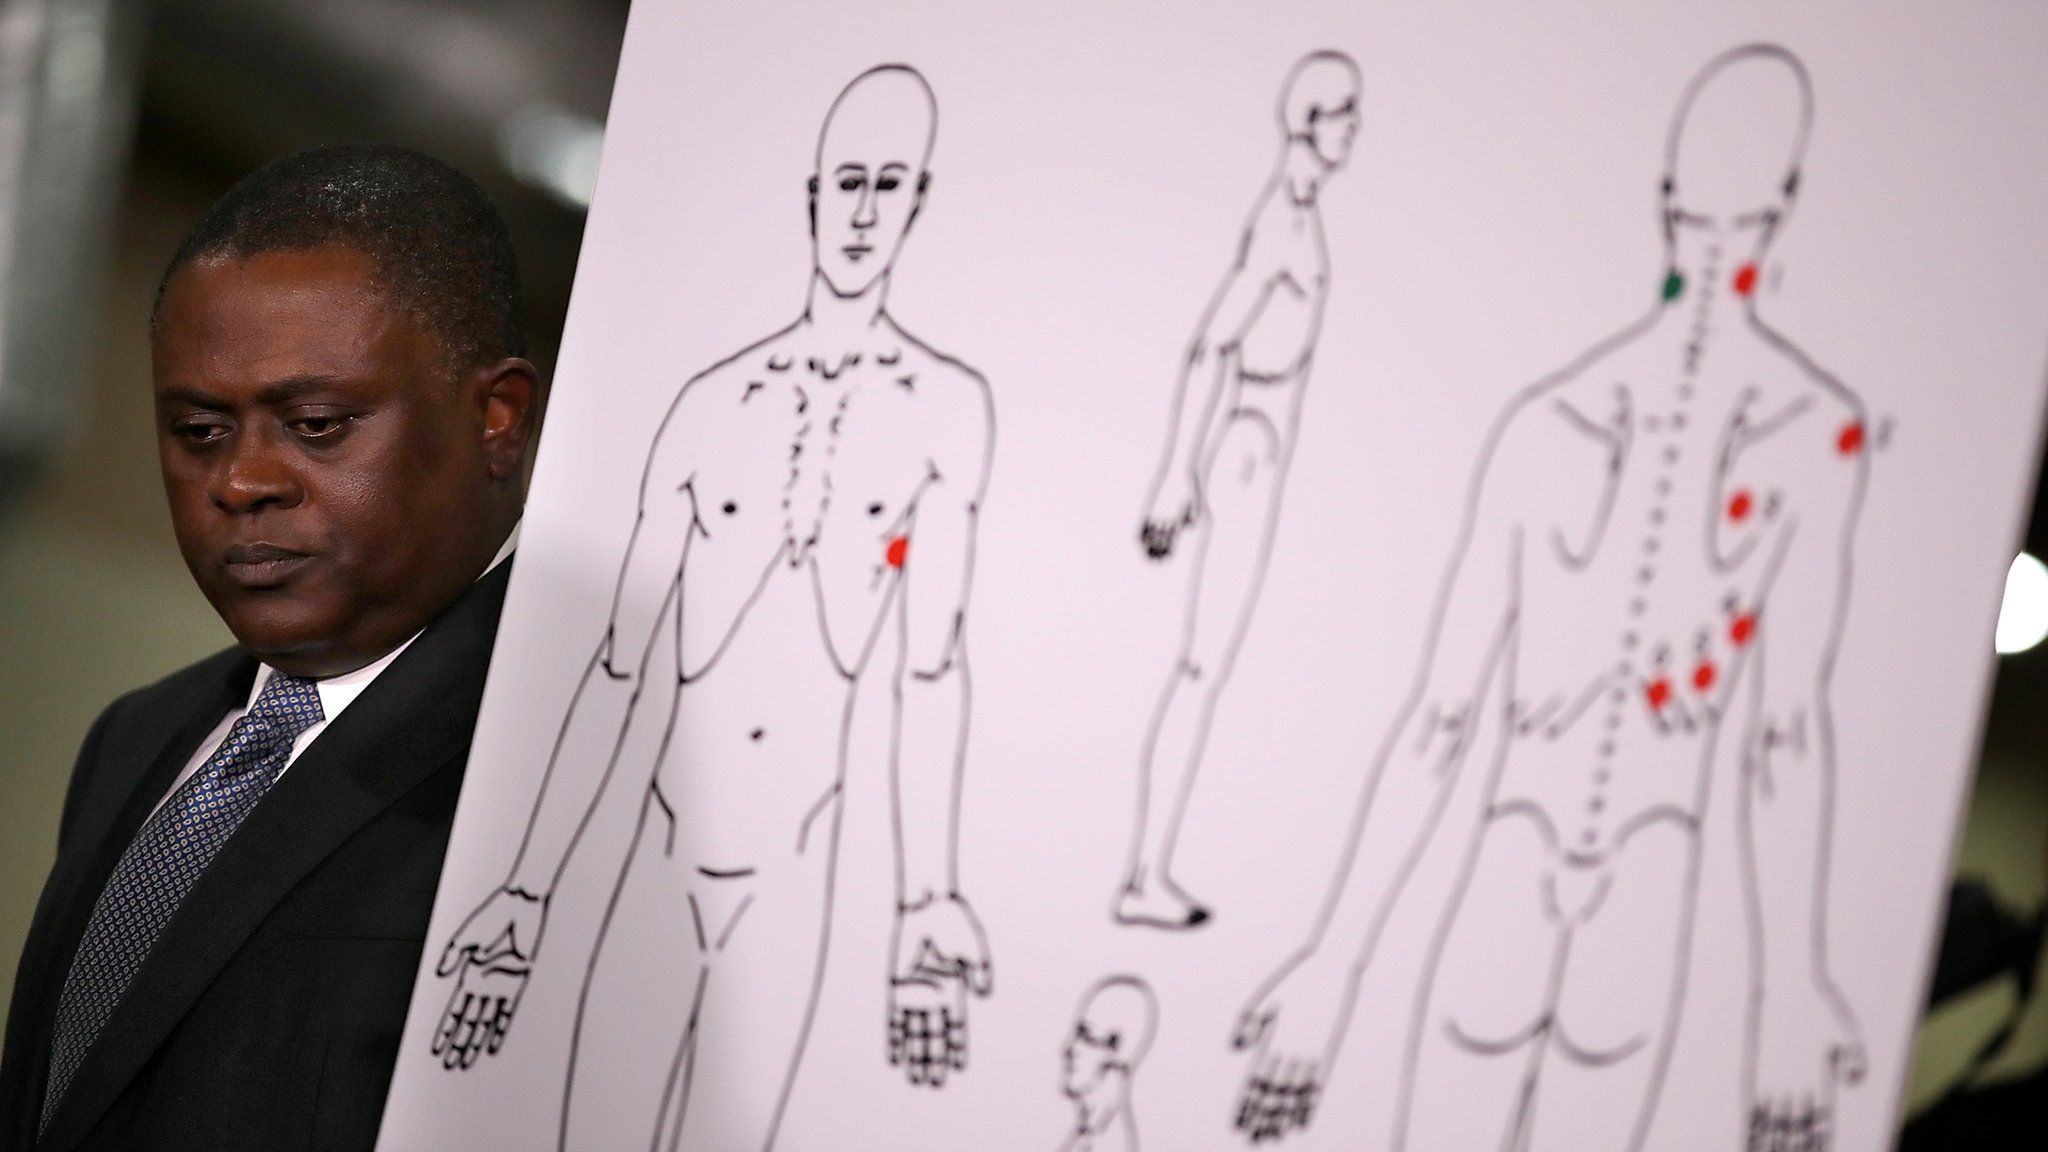 Dr. Bennet Omalu stands by a diagram showing the results of his autopsy of Stephon Clark